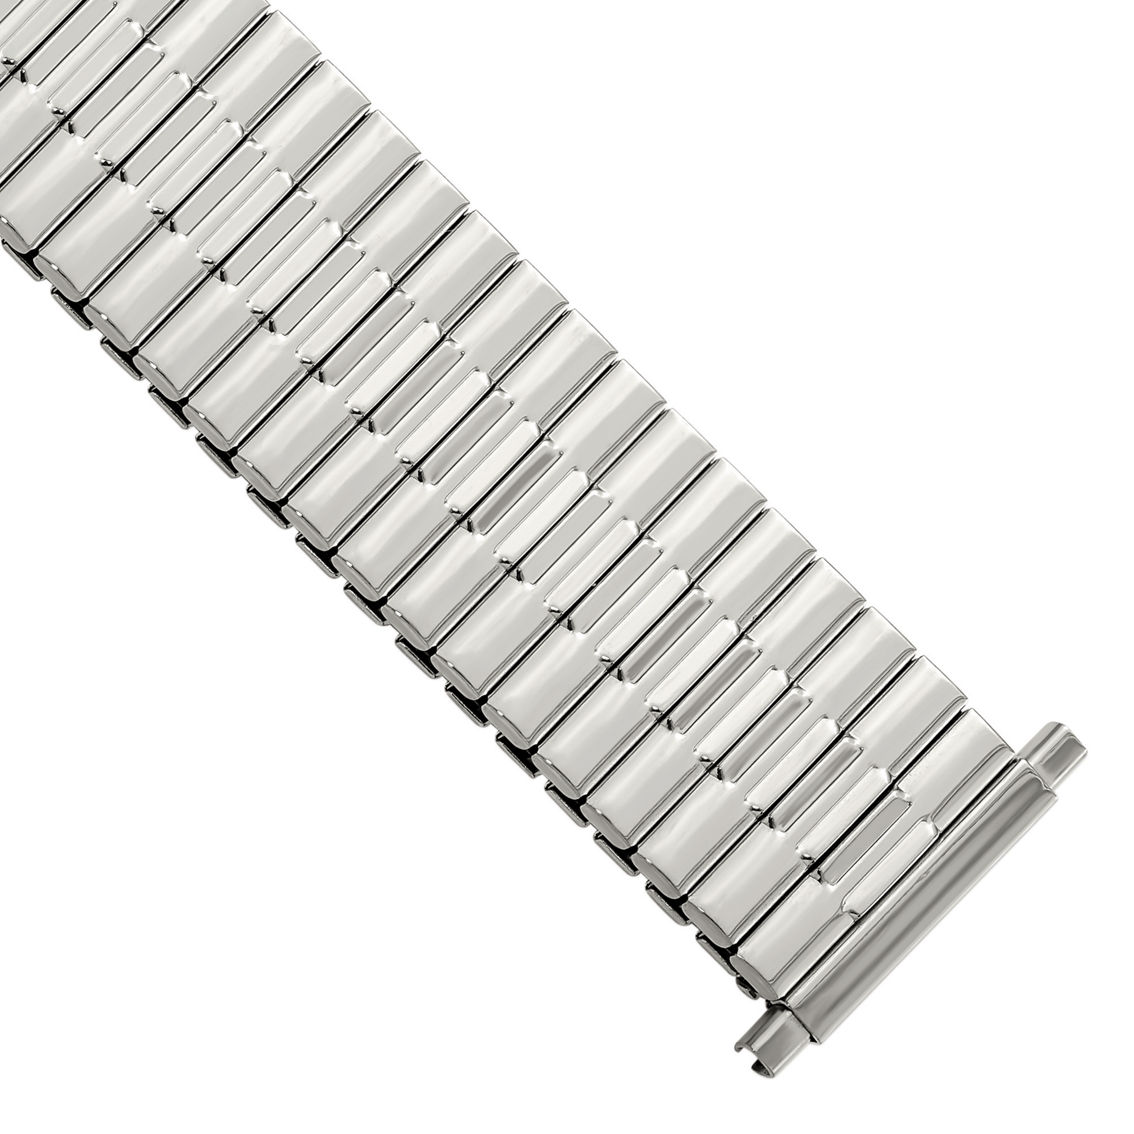 Gilden Men's Long 20-24mm Stainless Steel Expansion Watch Band - Image 3 of 3